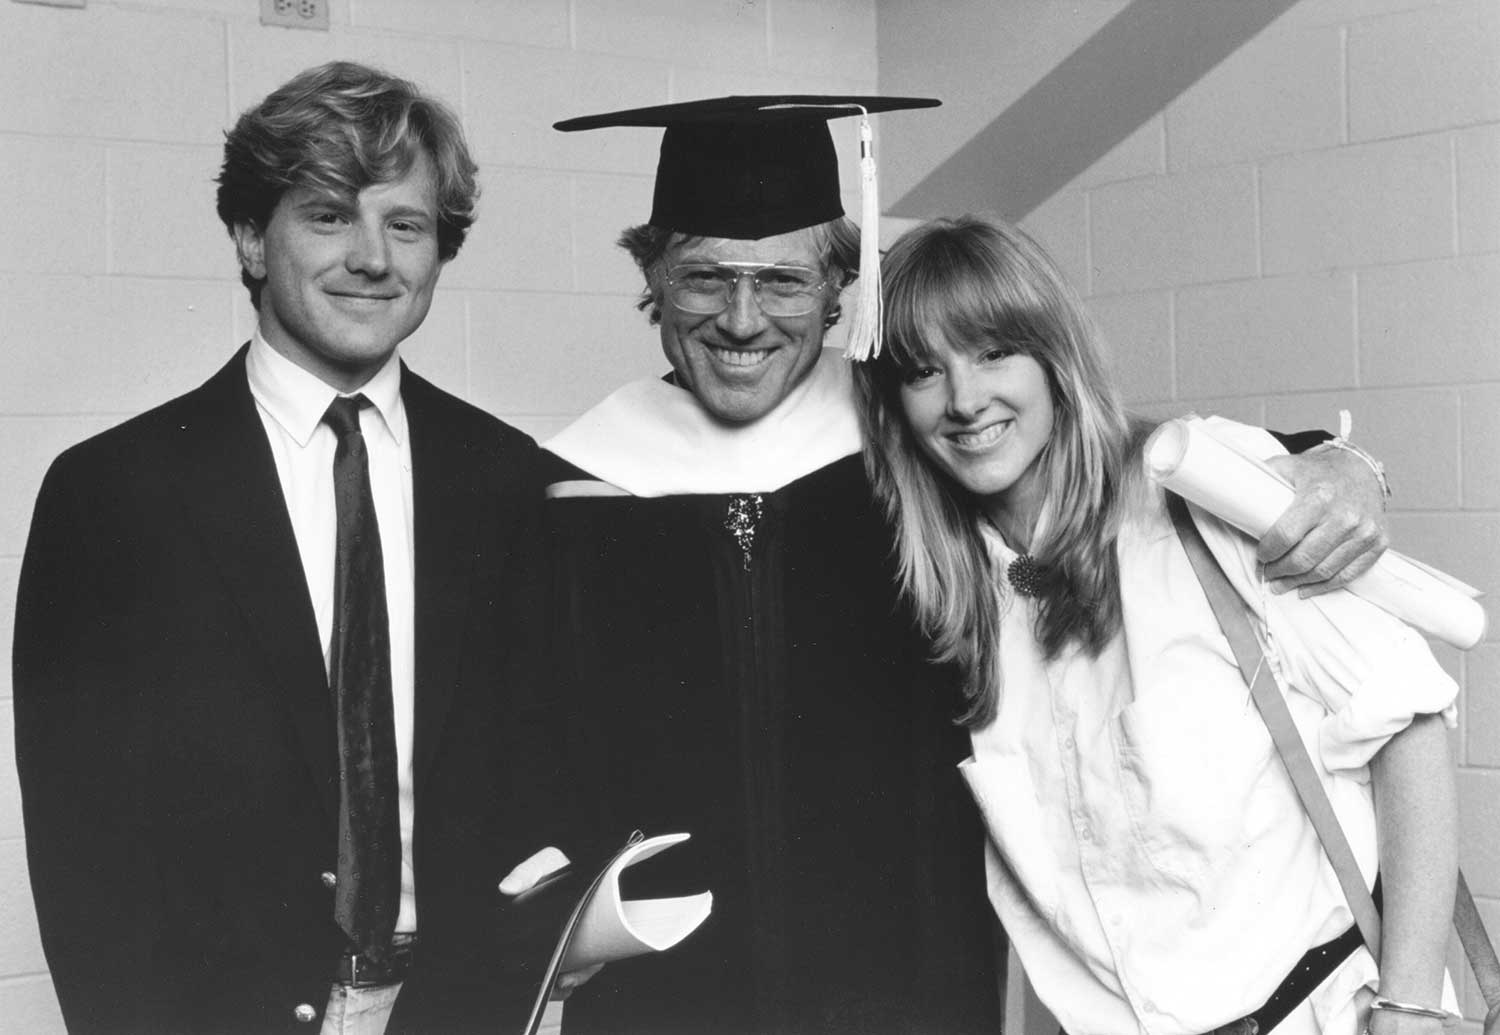 Robert Redford with his children David "Jamie" Redford and Shauna Redford Schlosser after receiving an honorary degree